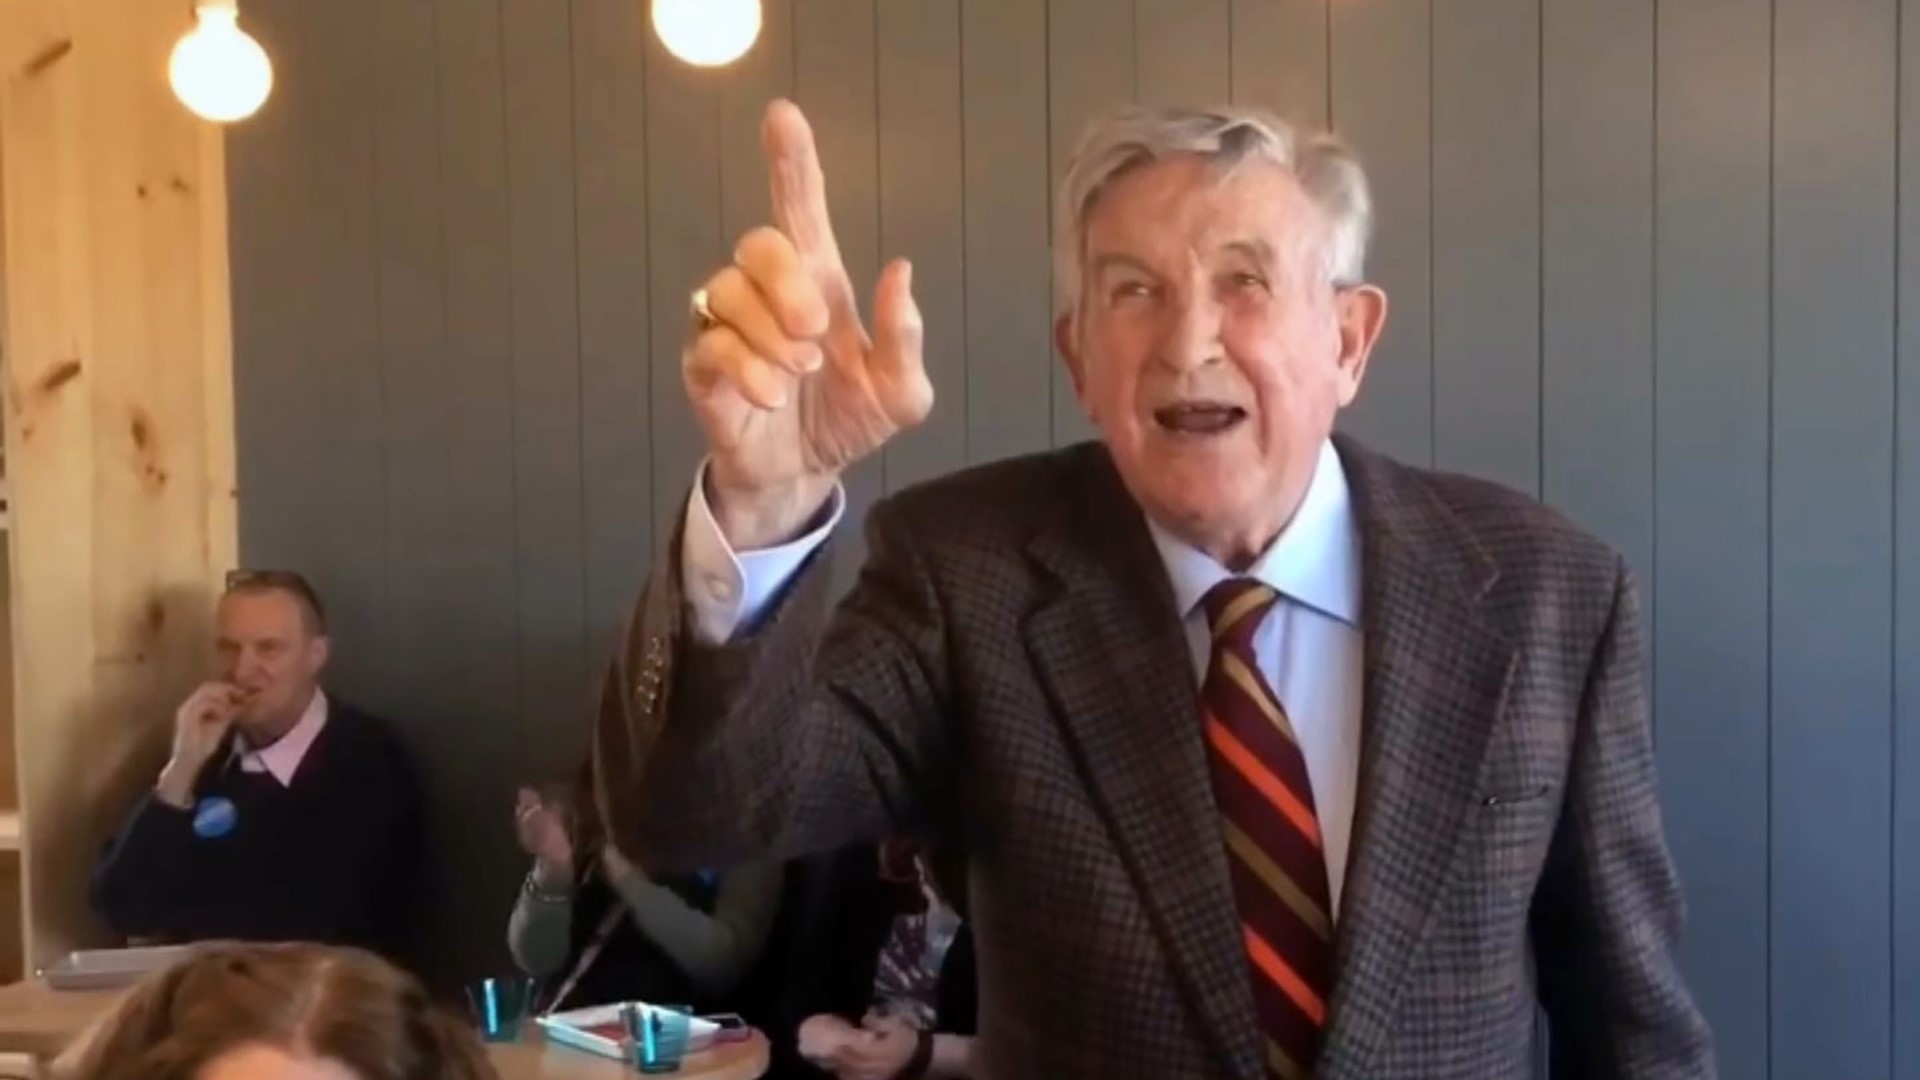 Former Tennessee football player and head coach Johnny Majors was a legend on the gridiron. But his legacy and community involvement extended beyond the field.